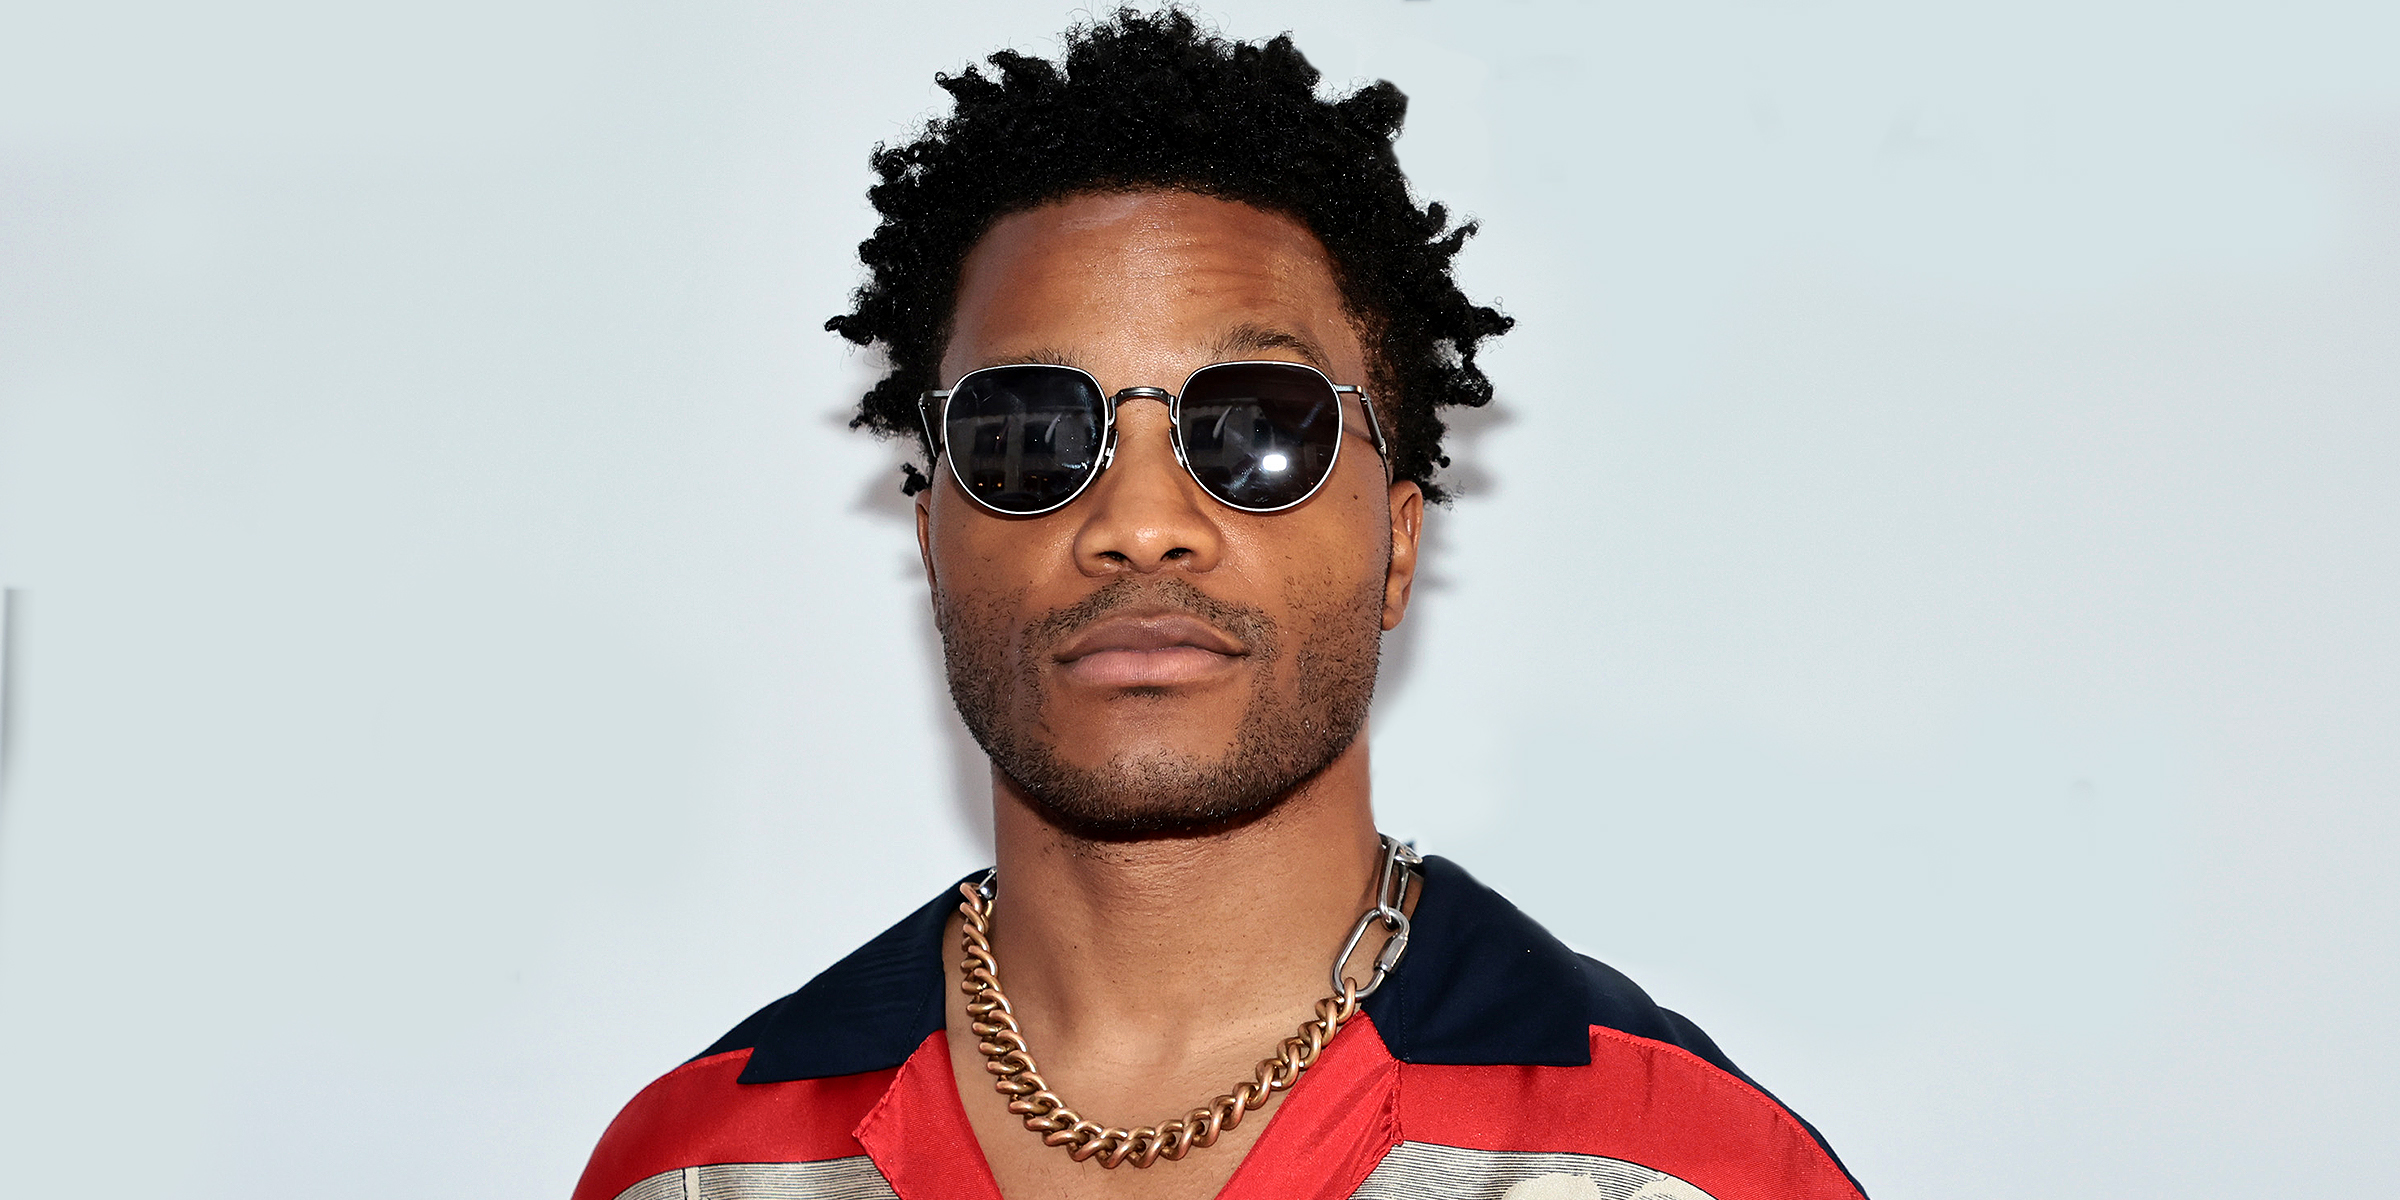 Jermaine Fowler | Source: Getty Images